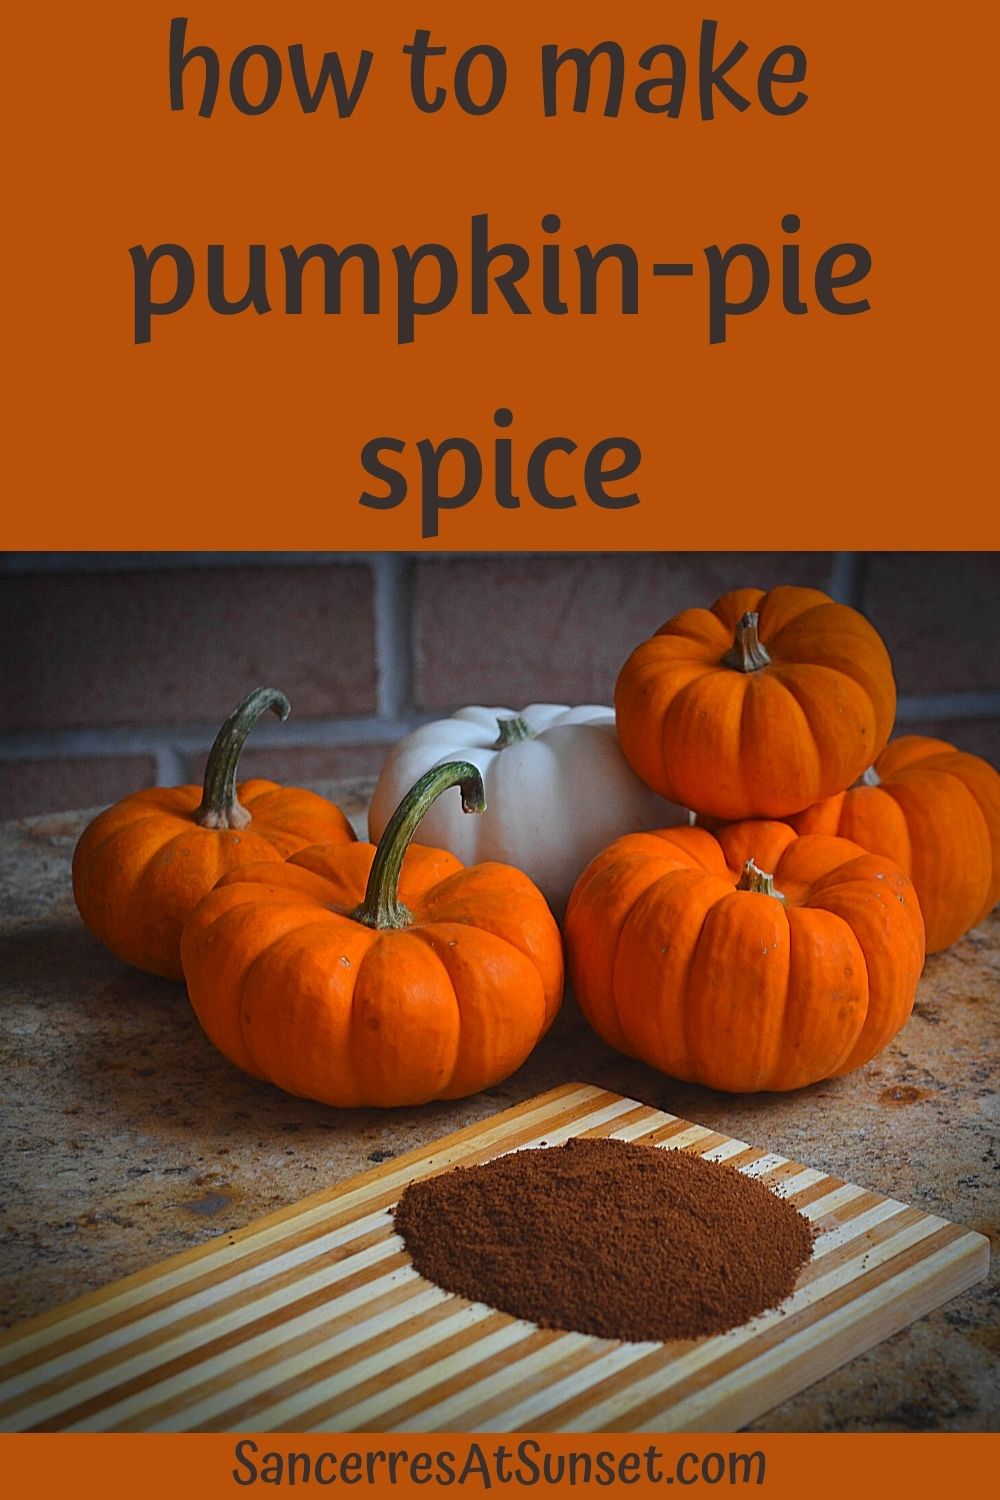 How to Make Your Own Pumpkin-Pie Spice